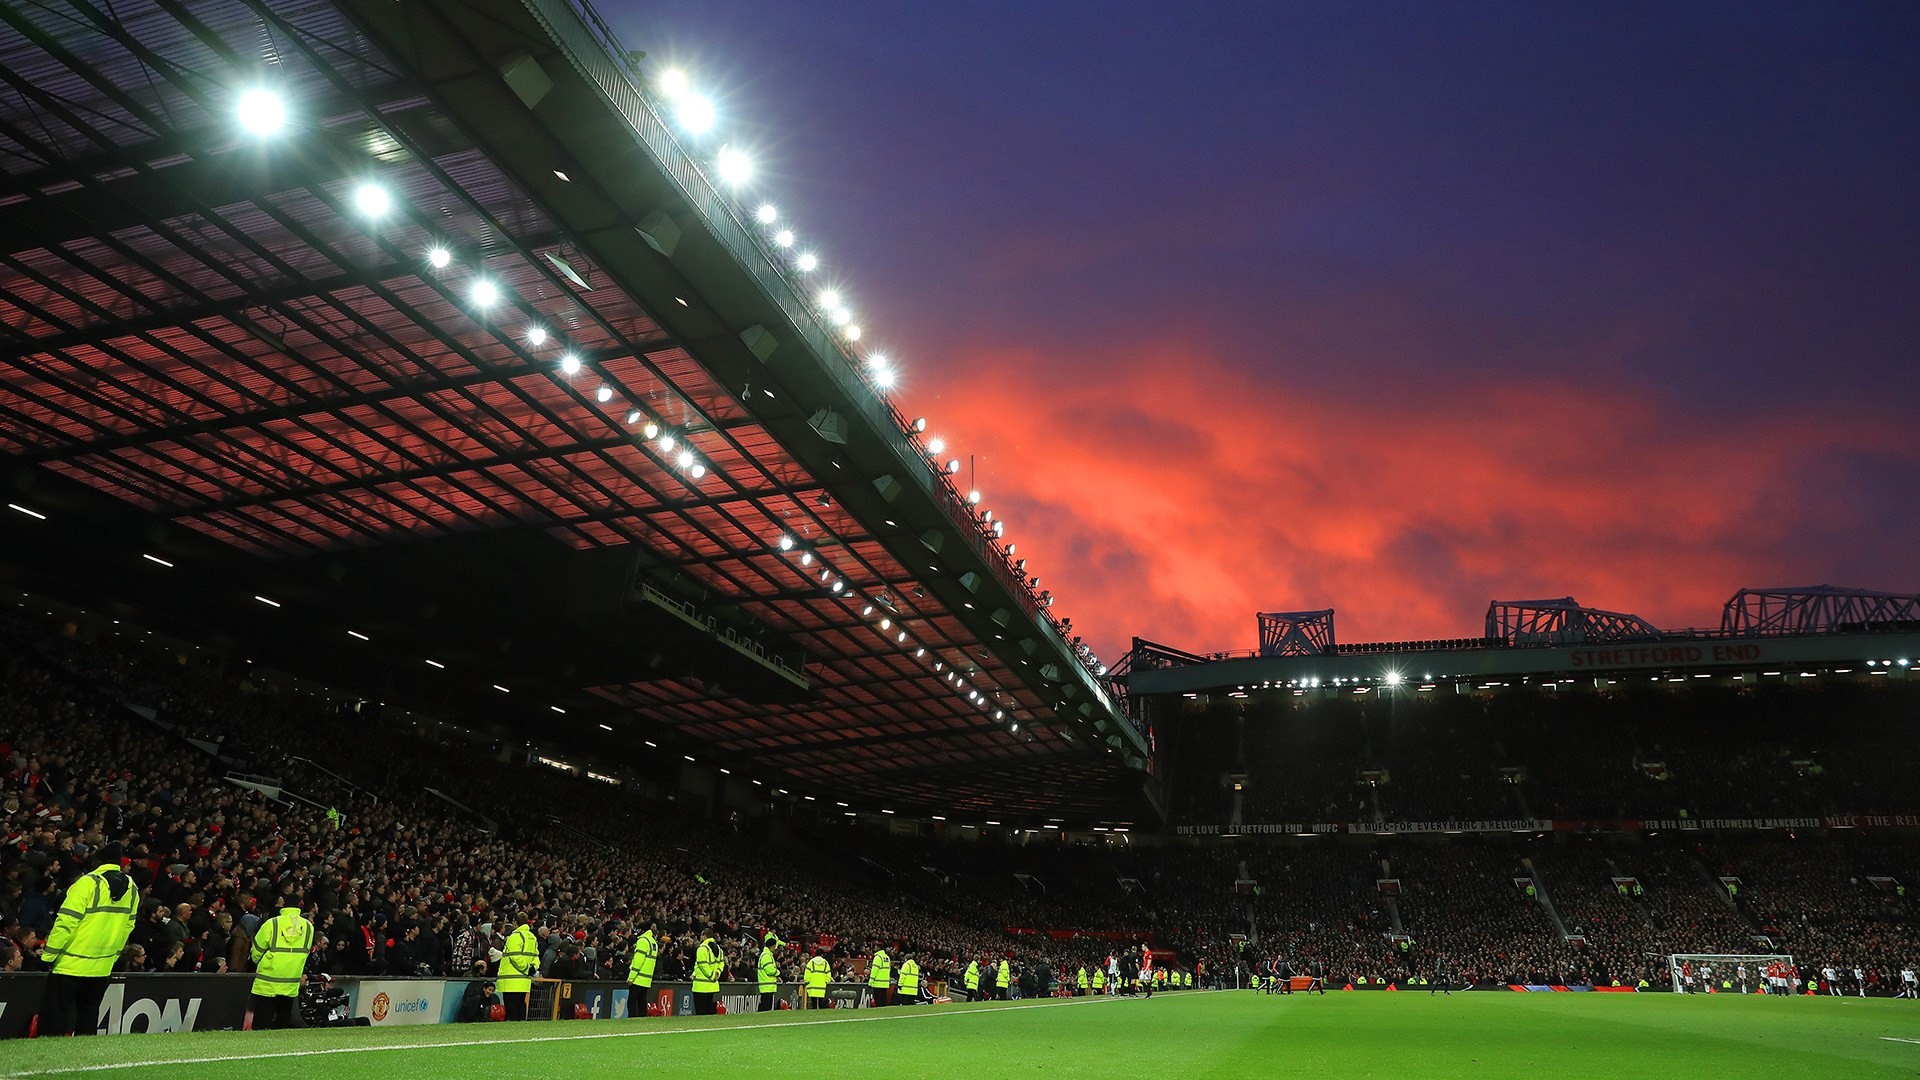 Old Trafford Wallpapers HD (80+ images)